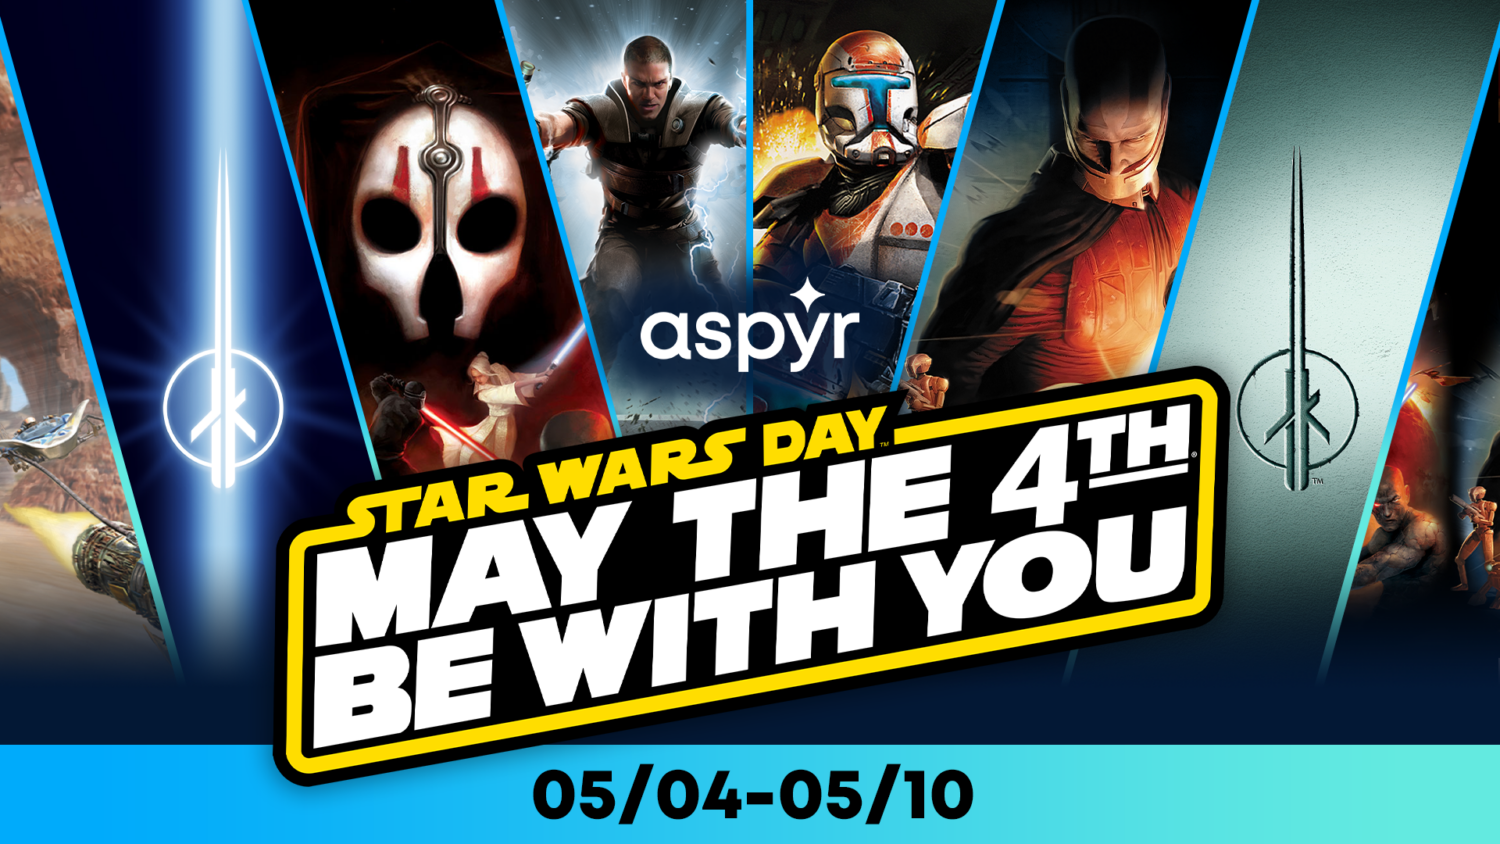 Nintendo Switch eShop - Star Wars day - May the 4th be with you